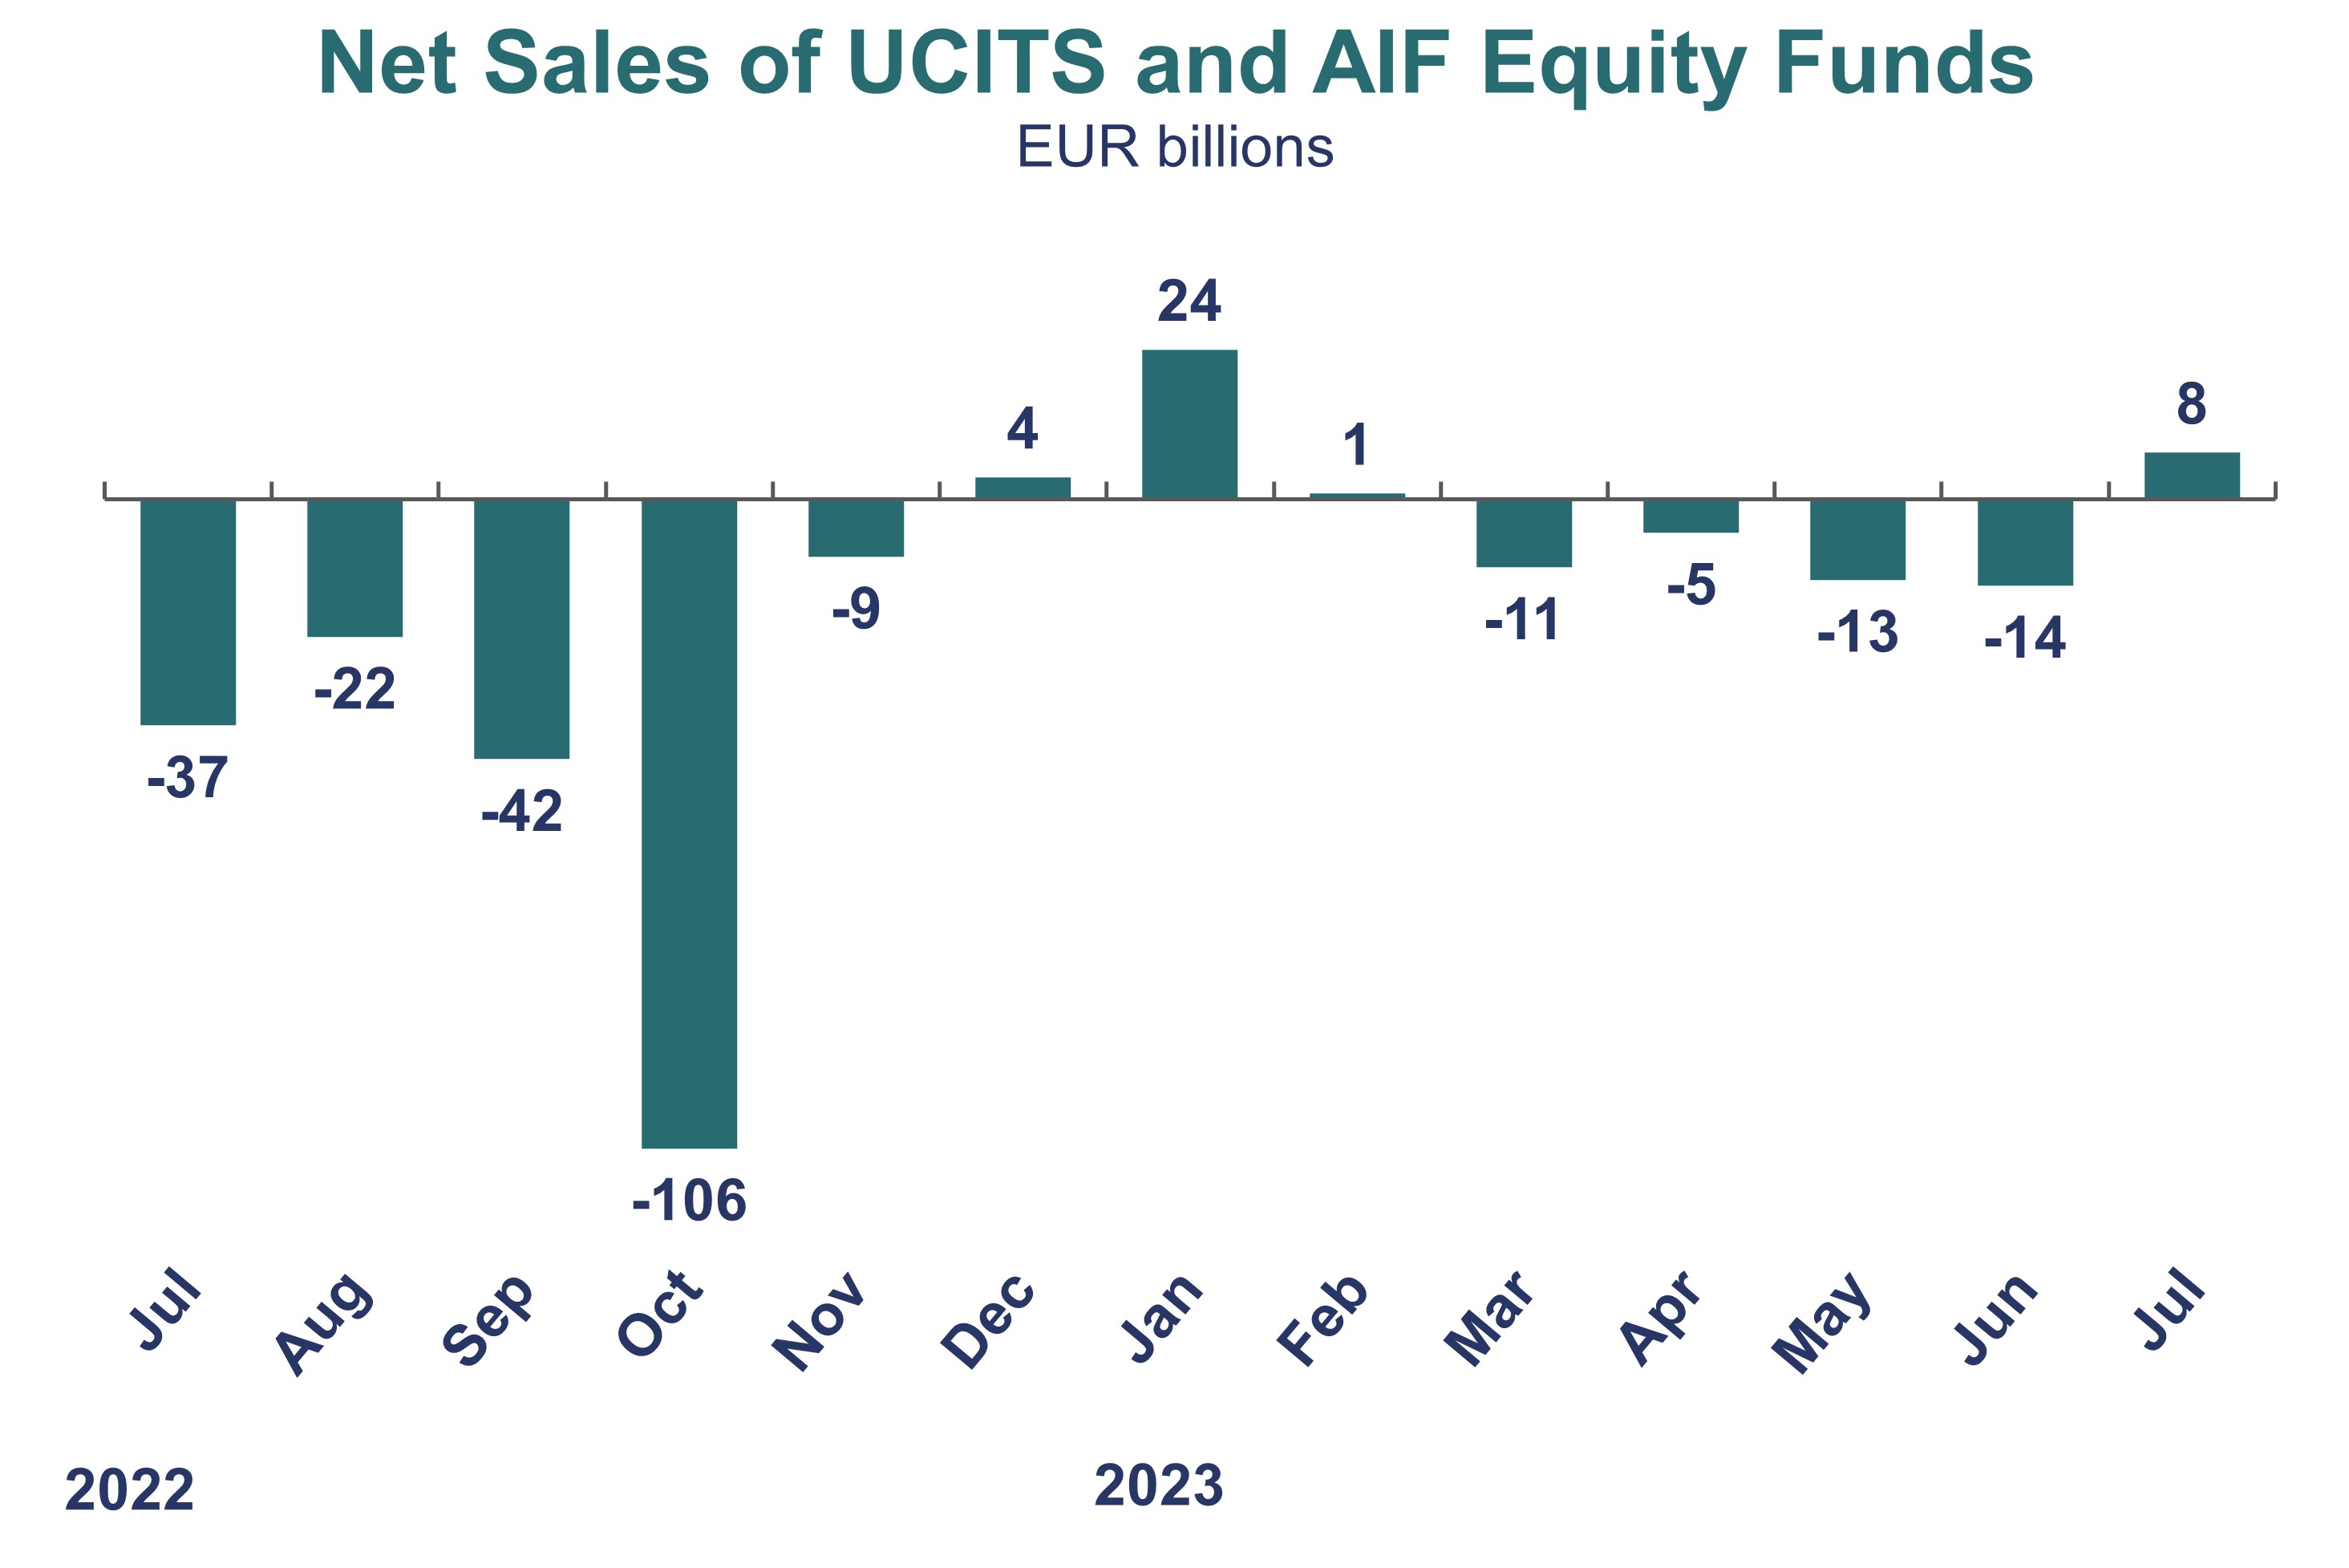 Net Sales of UCITS and AIF Equity Funds